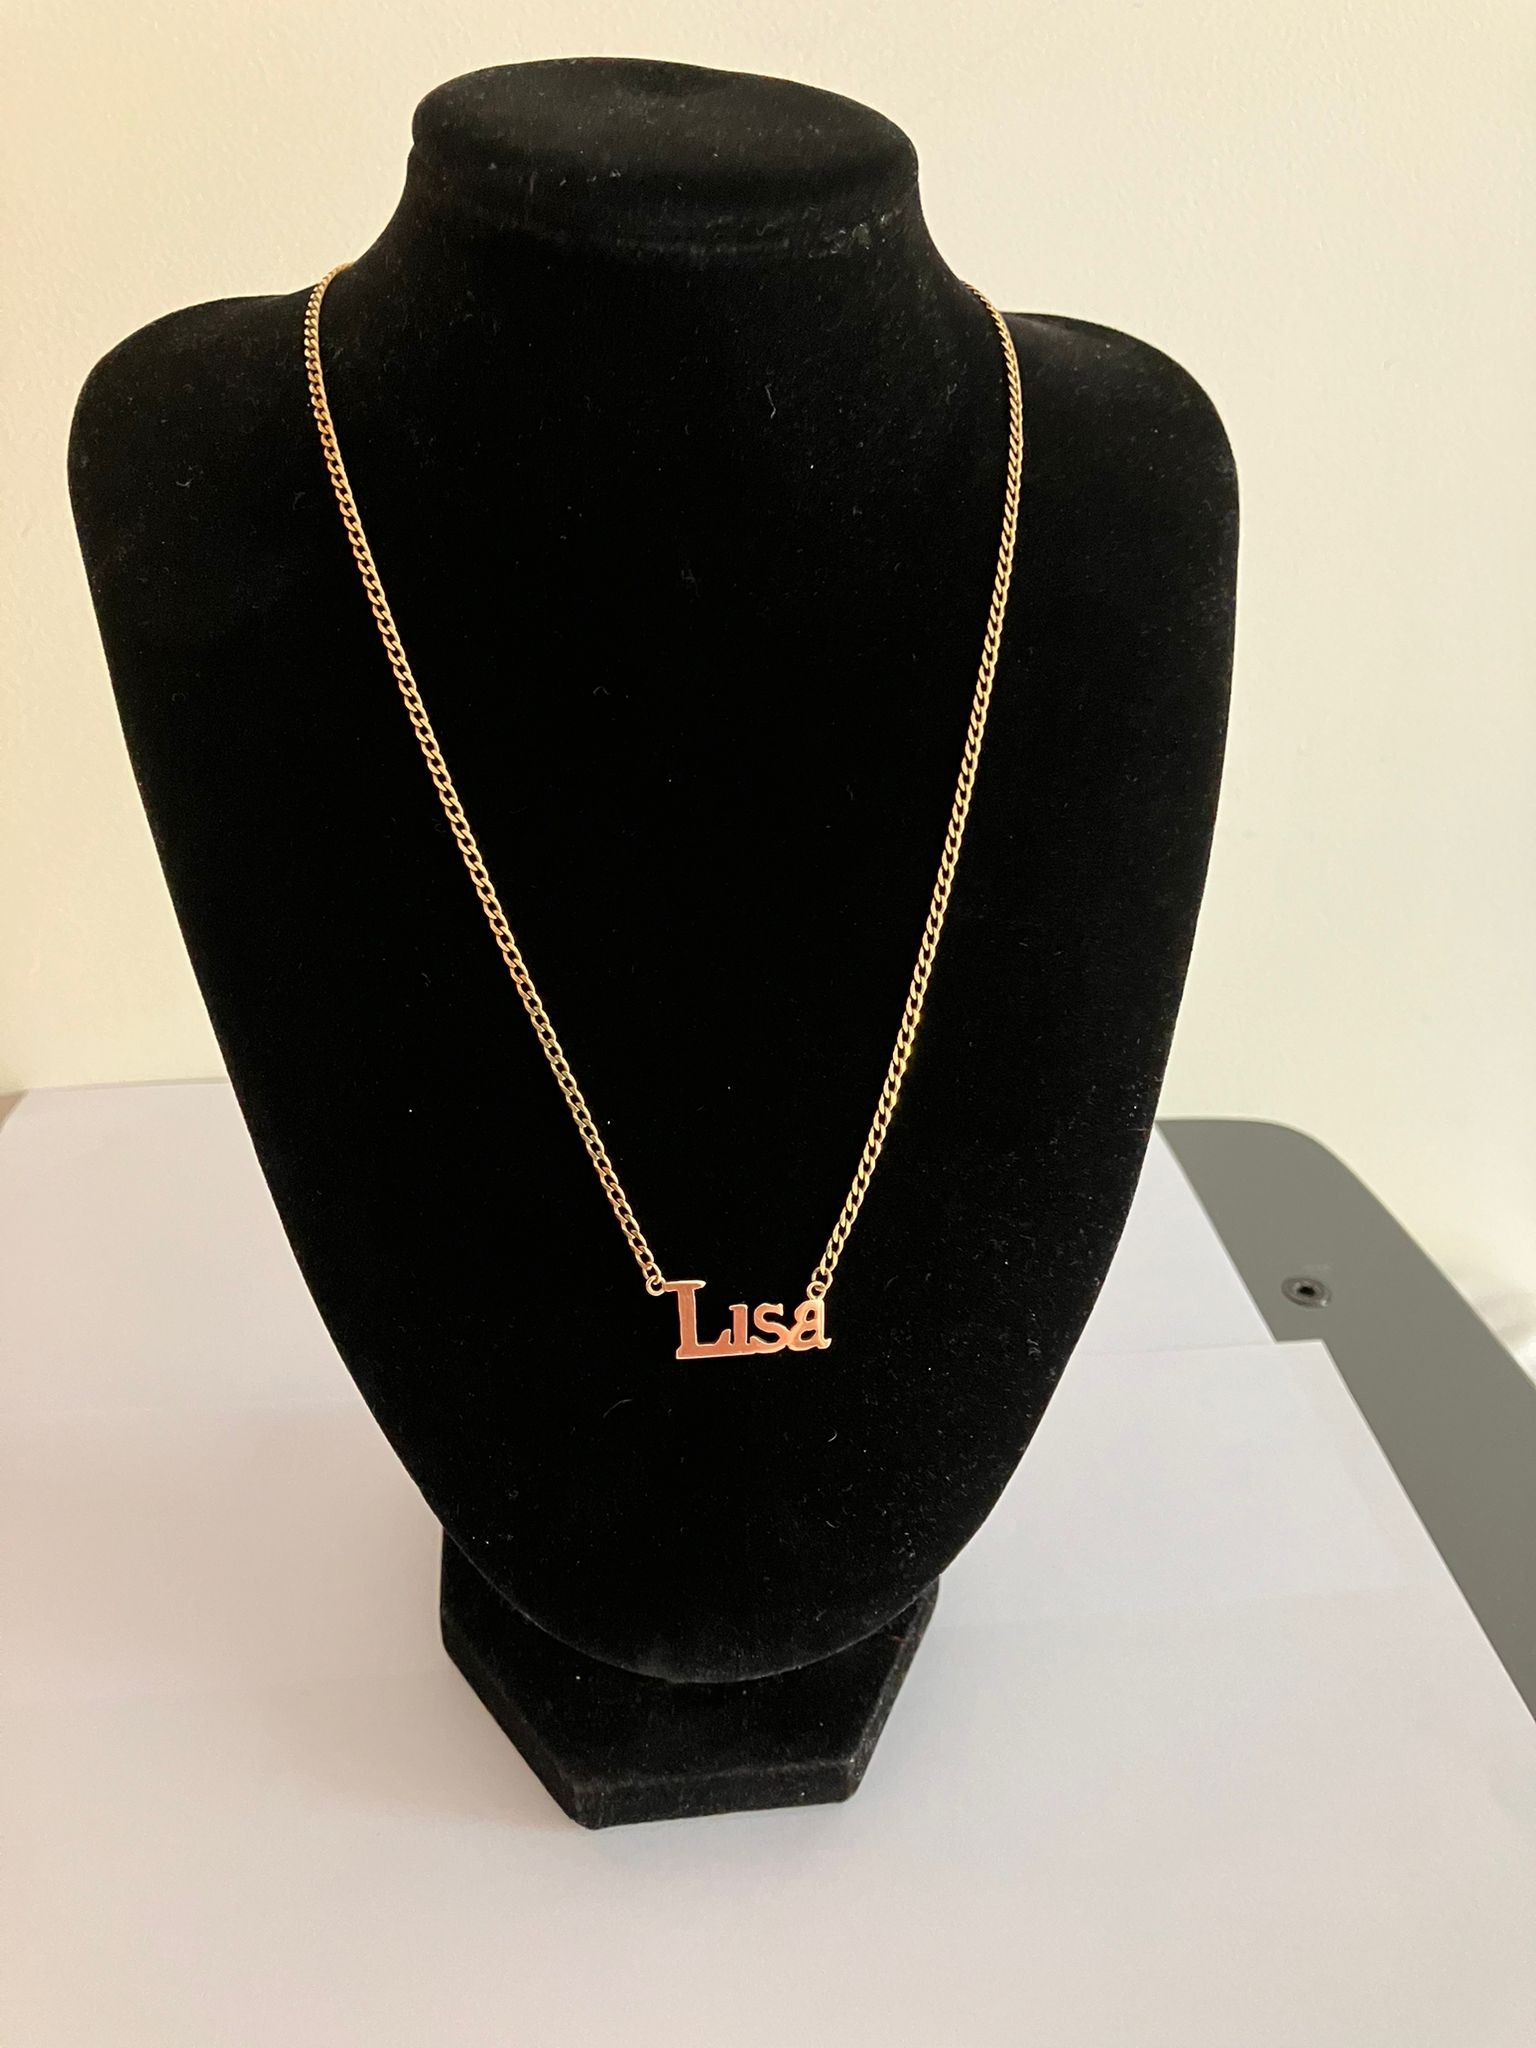 9 carat GOLD, CURB CHAIN NECKLACE with name of LISA. Full UK hallmark. 5.7 grams. 46 cm. - Image 6 of 11